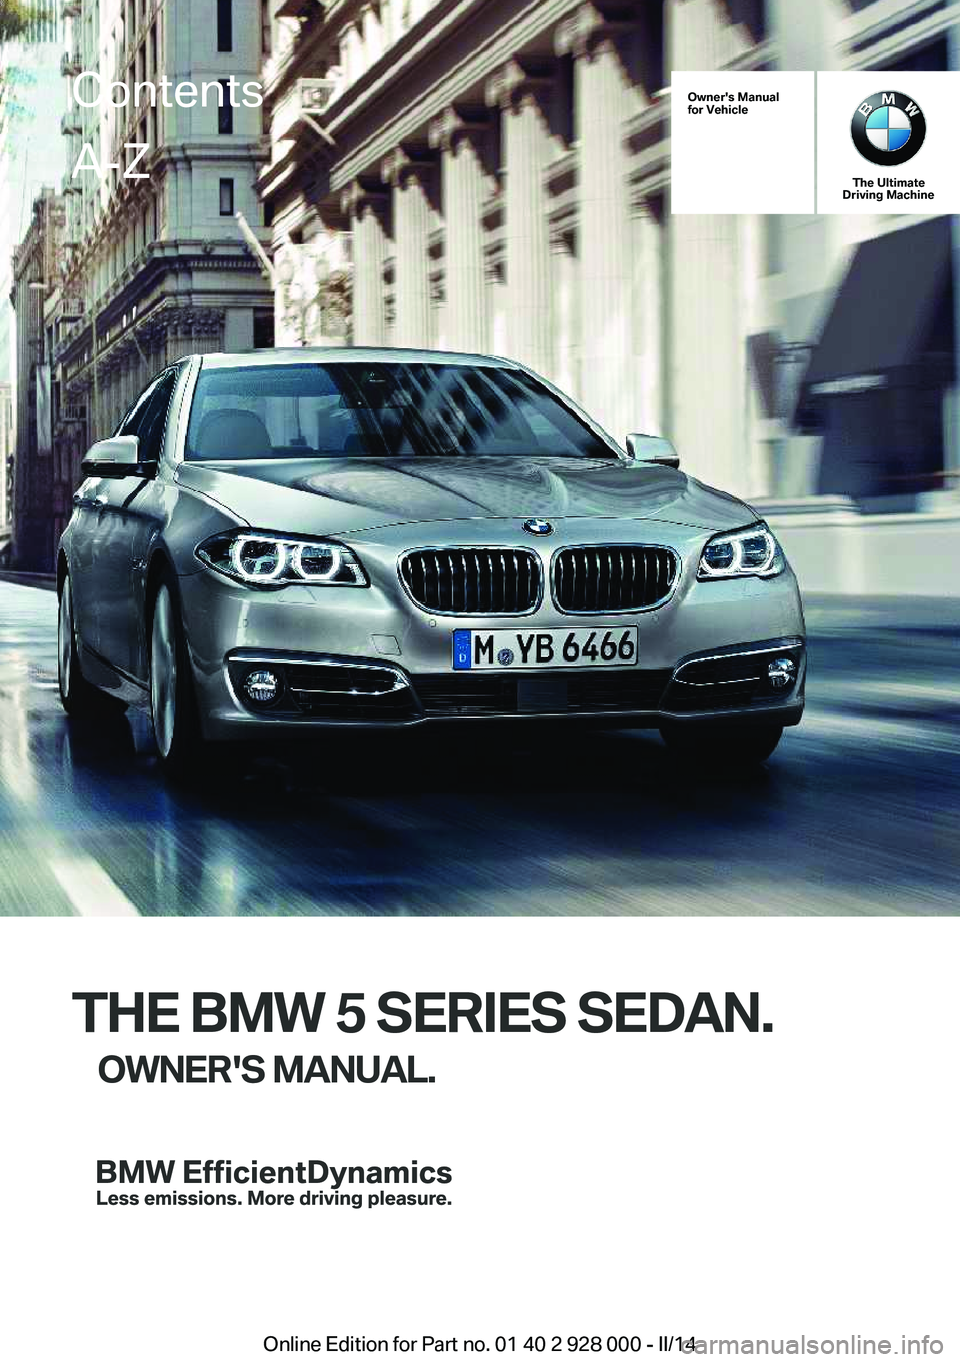 BMW 535I SEDAN 2014  Owners Manual Owner's Manual
for Vehicle
The Ultimate
Driving Machine
THE BMW 5 SERIES SEDAN.
OWNER'S MANUAL.
ContentsA-Z
Online Edition for Part no. 01 40 2 928 000 - II/14   